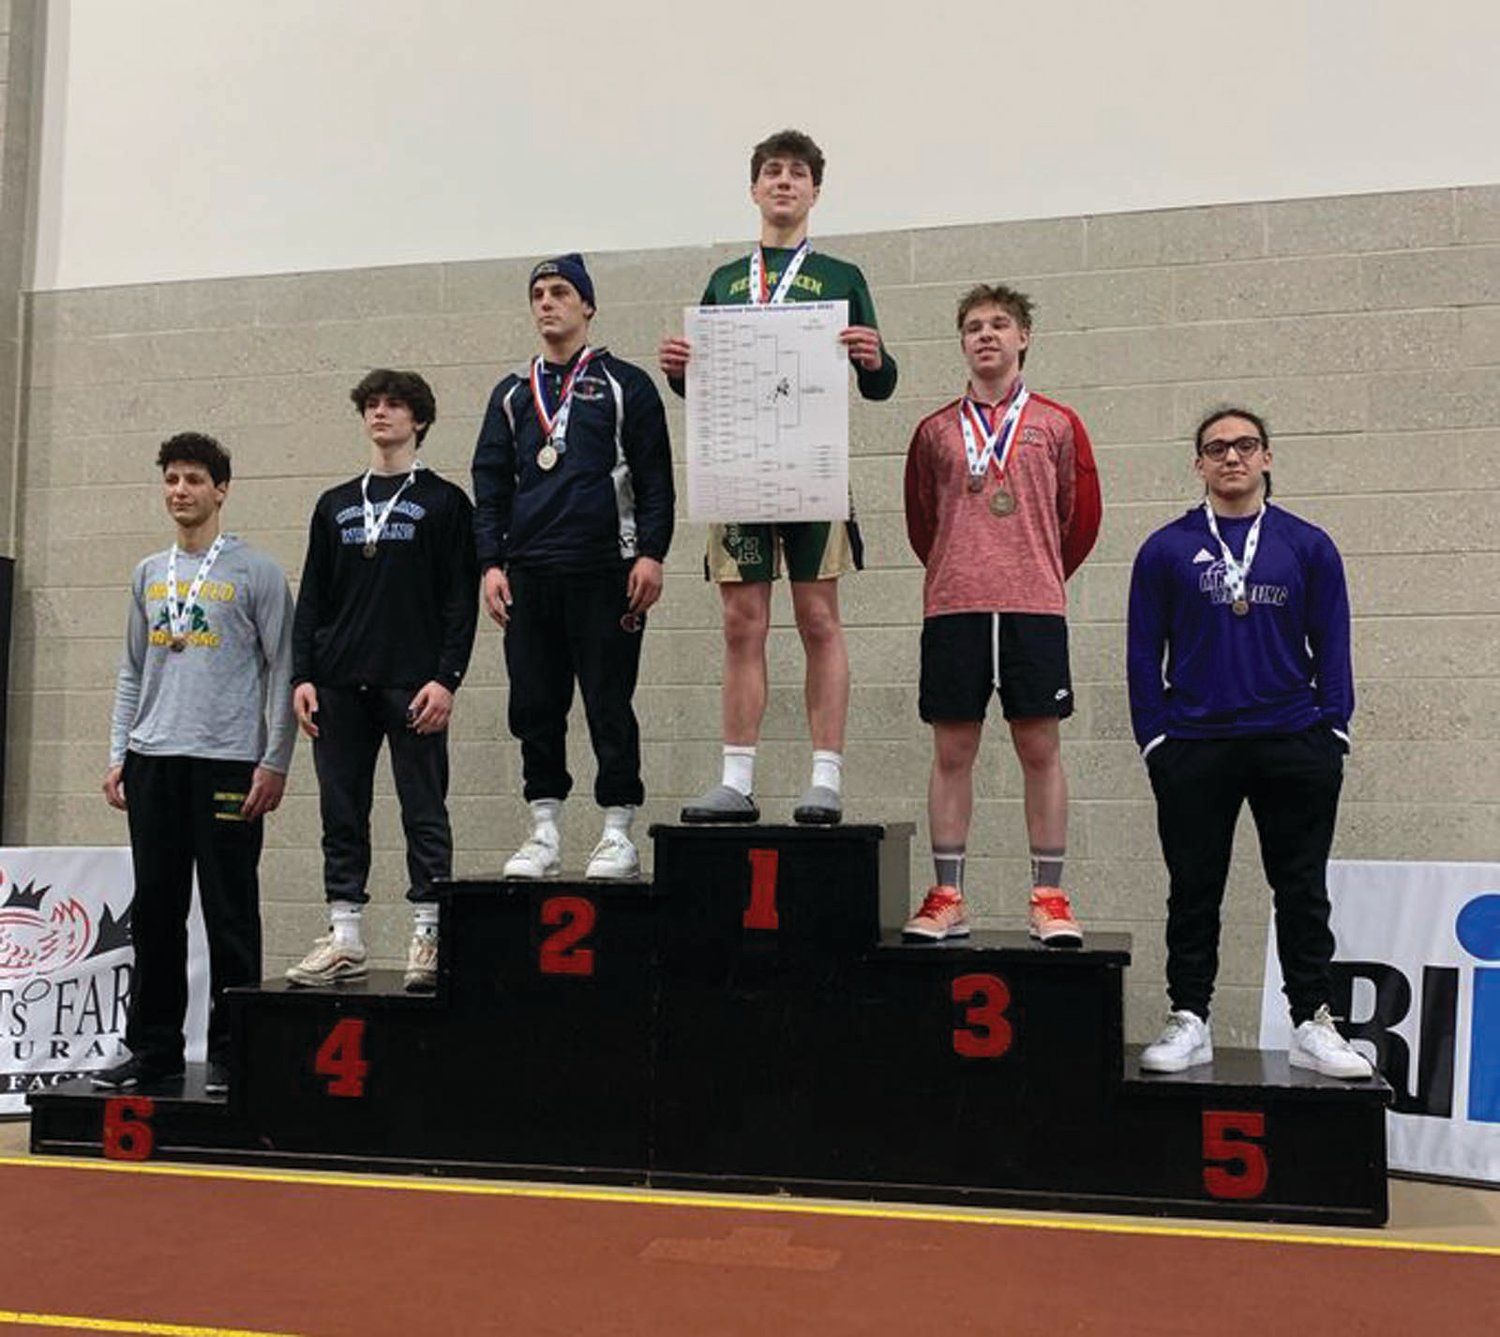 STATE CHAMP: Hendricken’s Adolfo Betancur receives his first-place medal.